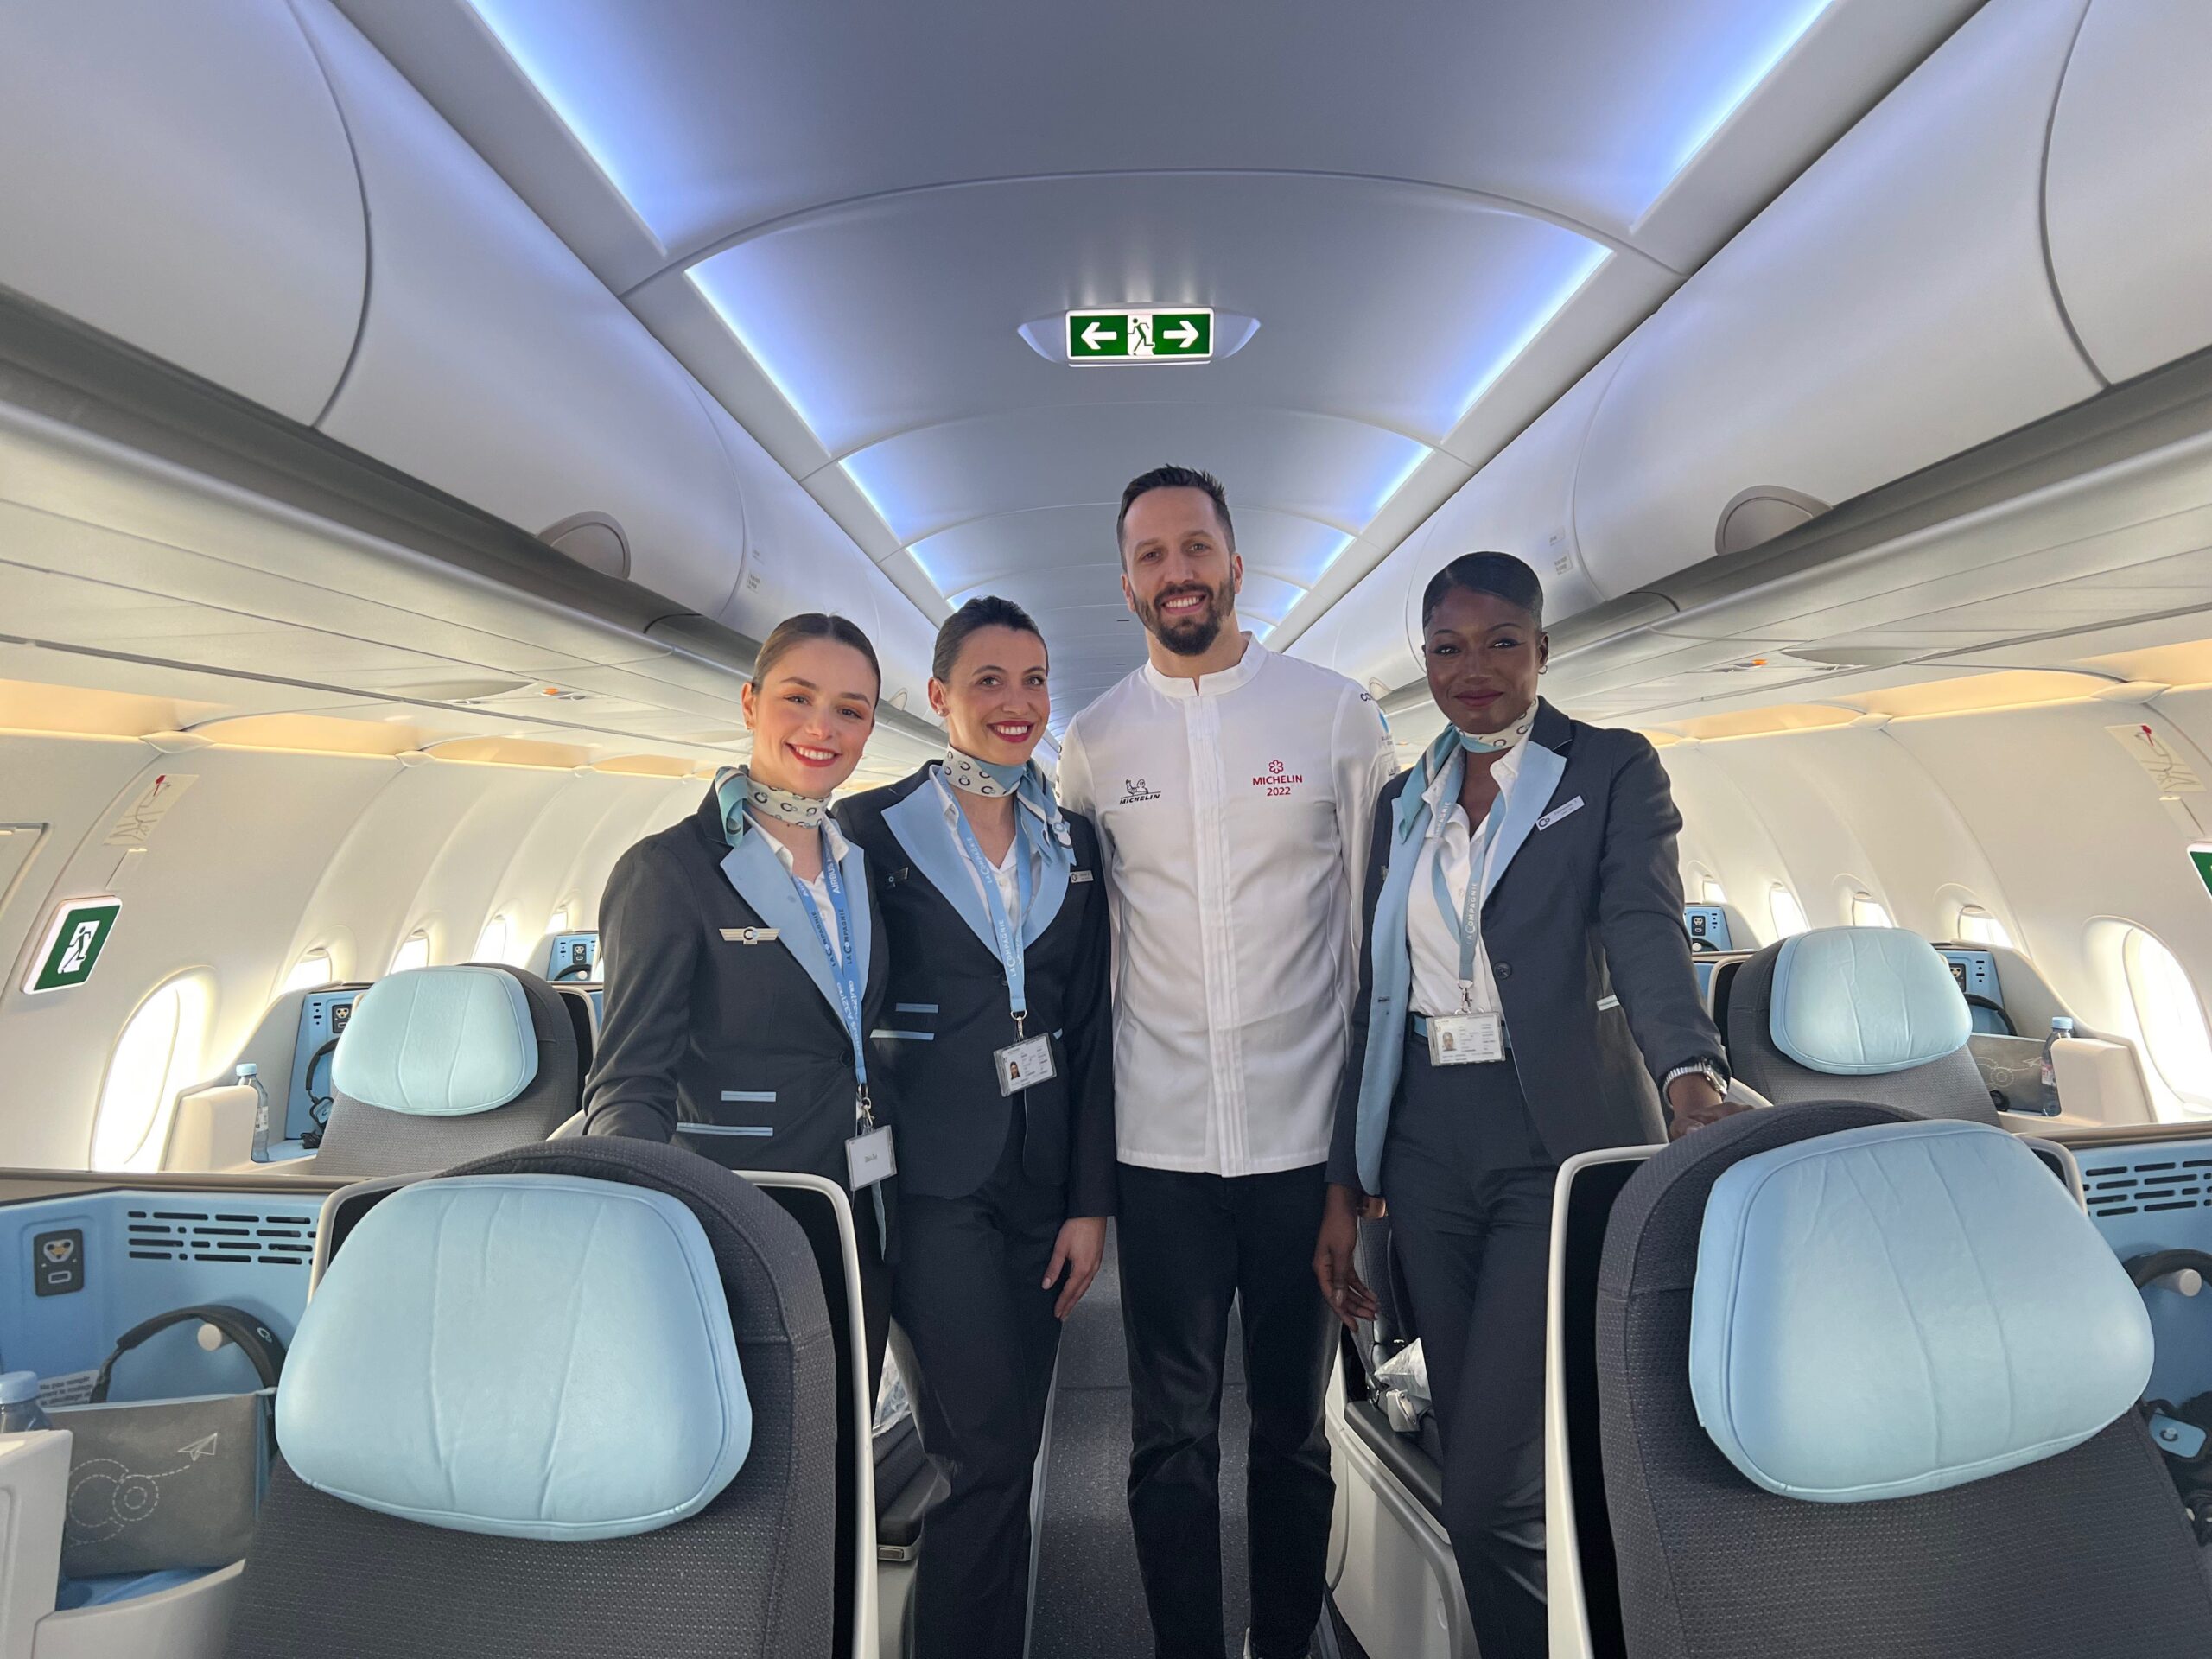 Flying on La Compagnie all-business class airline from Paris to New York &mdash; chef Franco Sampogna with the flight attendants.